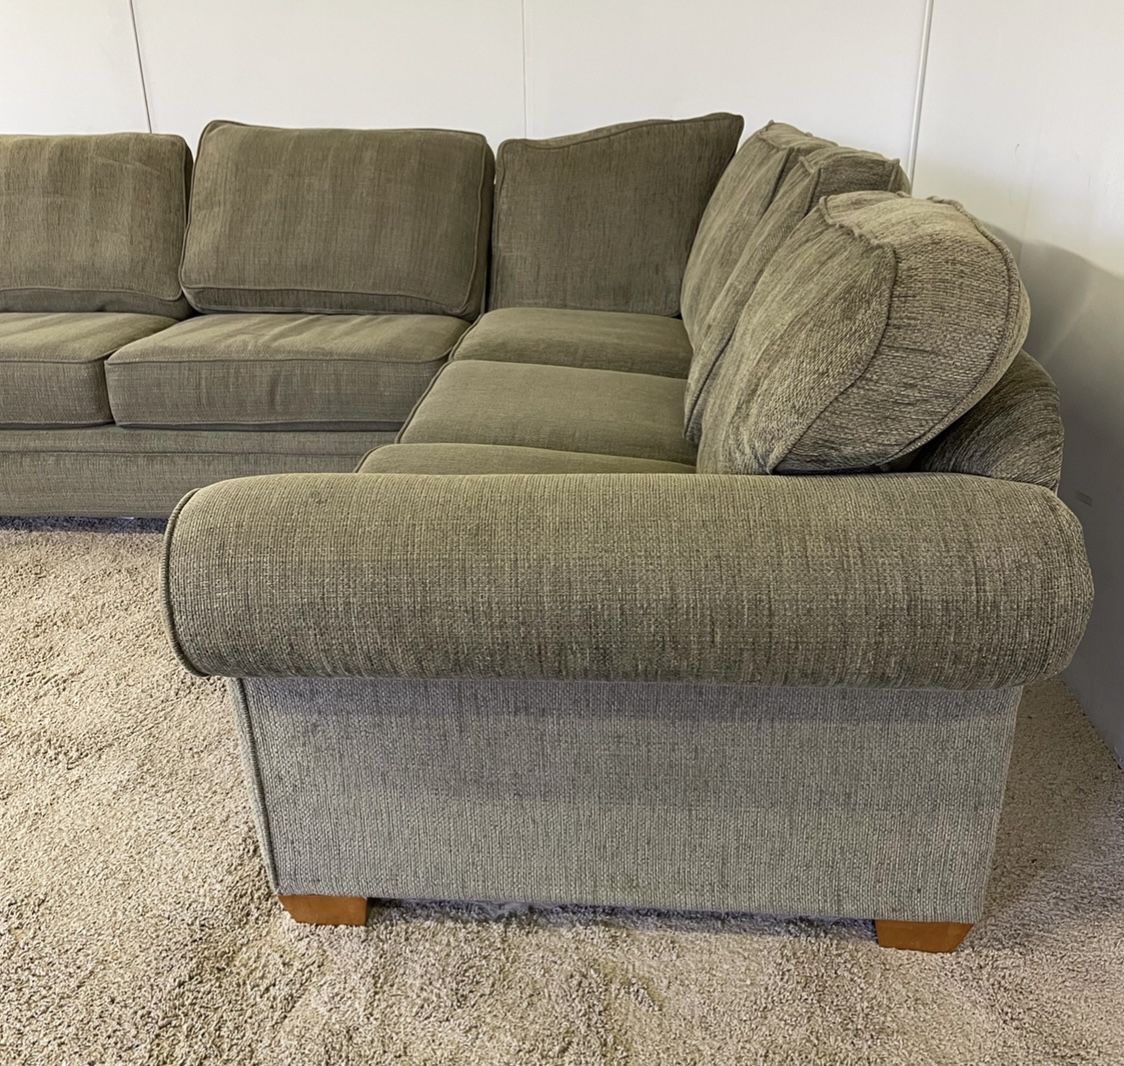 3 Piece Sectional Set FREE DELIVERY 